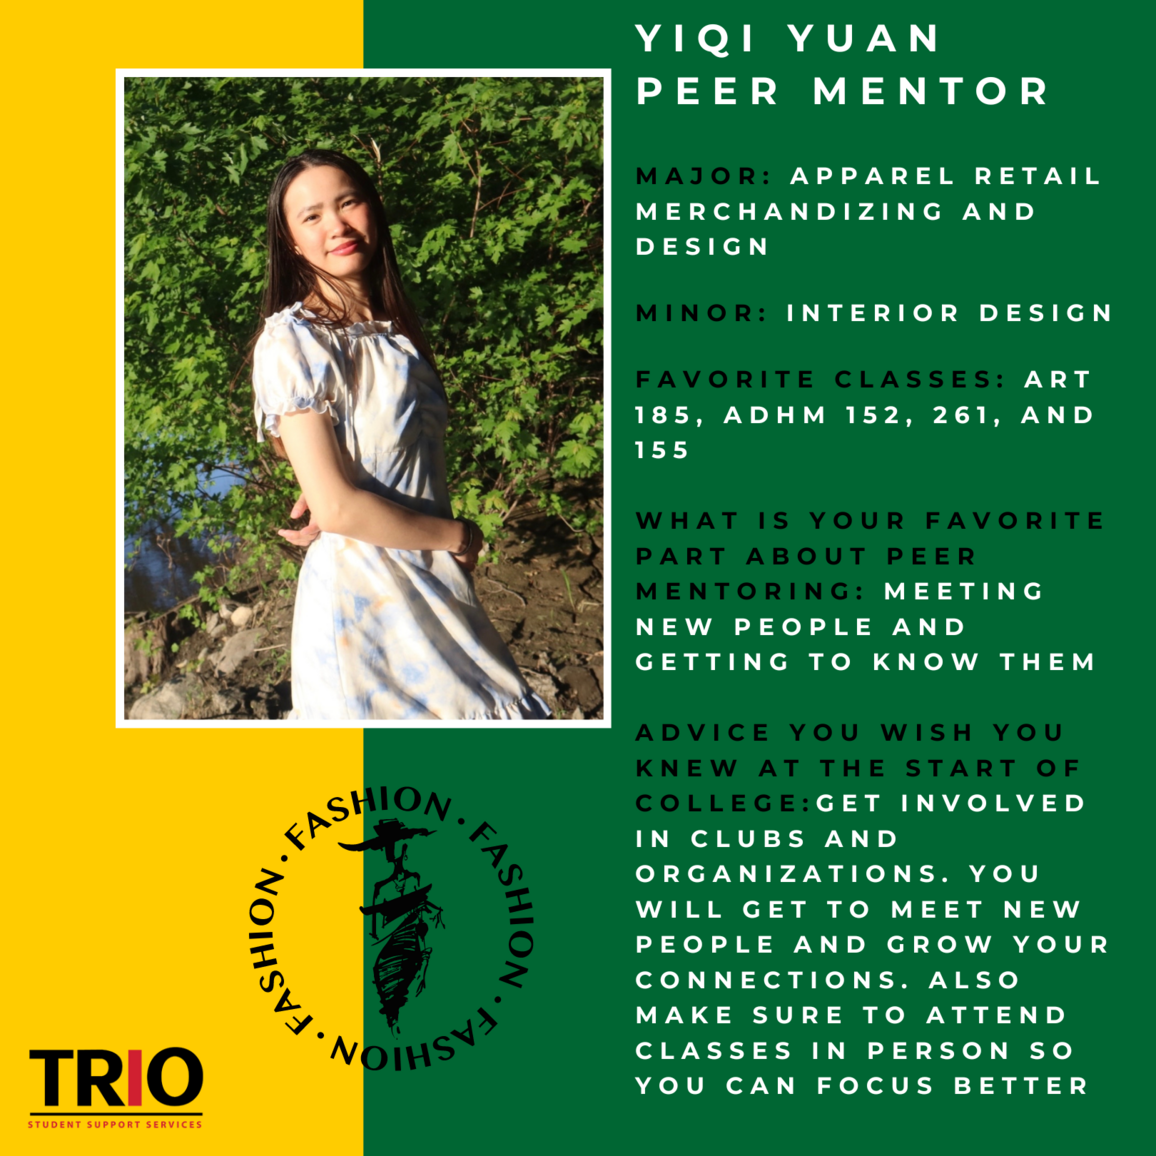 Yiqi Yuan Peer Mentor, Major: Apparel Retail Merchandizing and Design  Minor: INterior Design  Favorite CLasses: art 185, ADHM 152, 261, and 155  What is your Favorite Part about PEer Mentoring: Meeting new people and Getting to know them  Advice you wish you knew at the start of college:Get involved in clubs and organizations. You will get to meet new people and grow your connections. Also make sure to attend Classes in Person so you can focus better